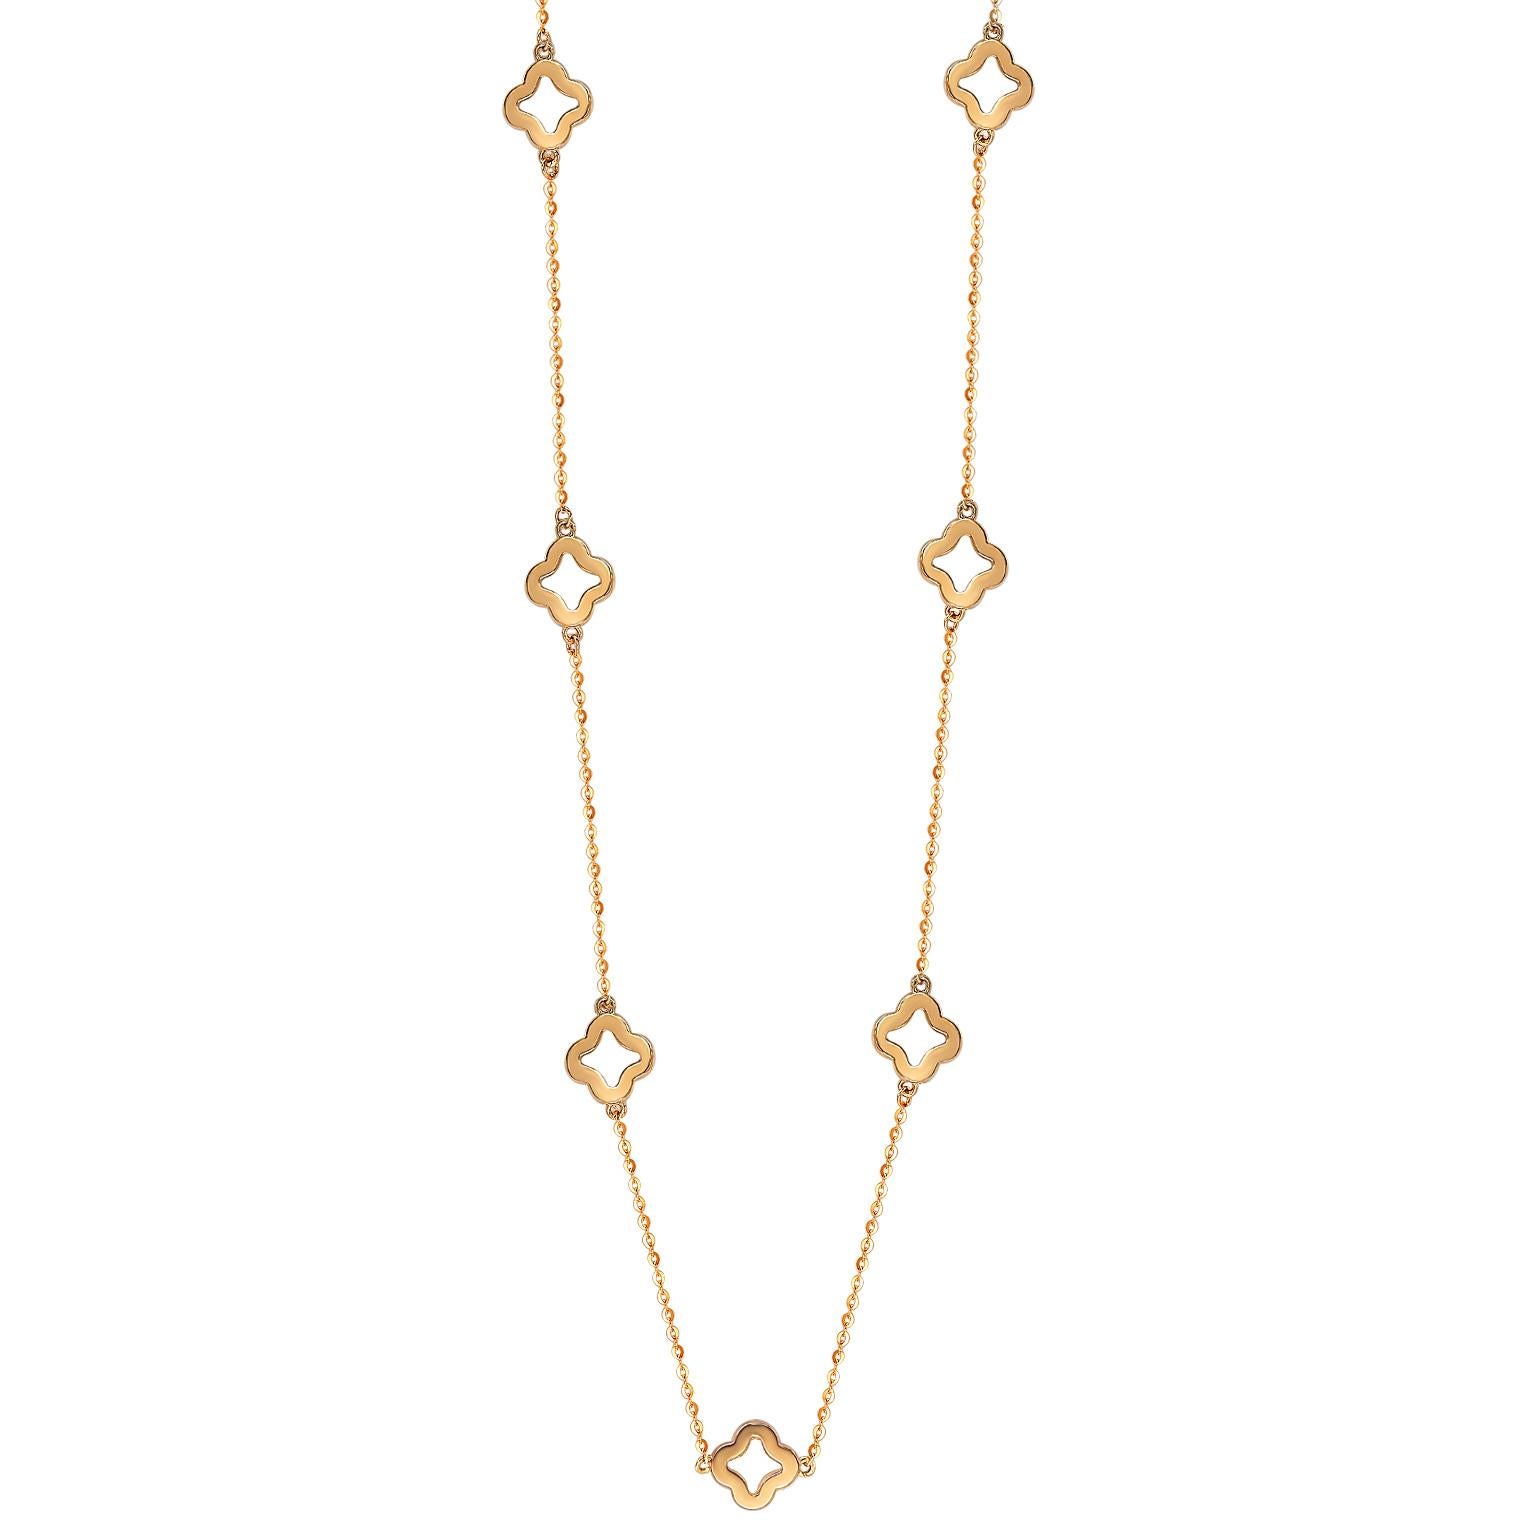 This unique Suzy Levian diamond open clover by the yard necklace displays round-cut diamonds on 14 karat rose gold setting. This gorgeous necklace contains 126, 1 mm white round cut diamonds totaling .63 cttw. The necklace has 7 clovers, each clover